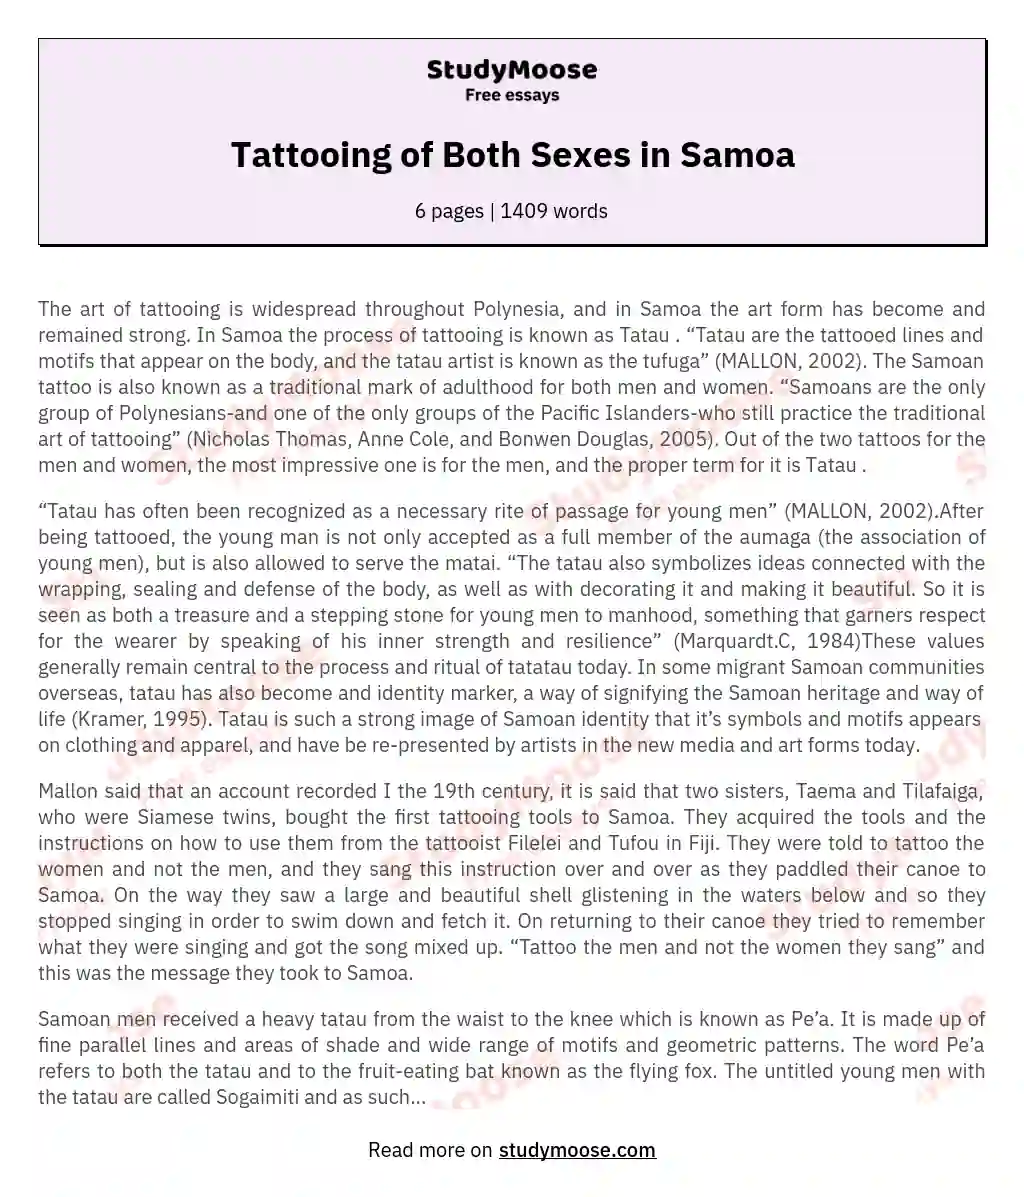 Tattooing of Both Sexes in Samoa